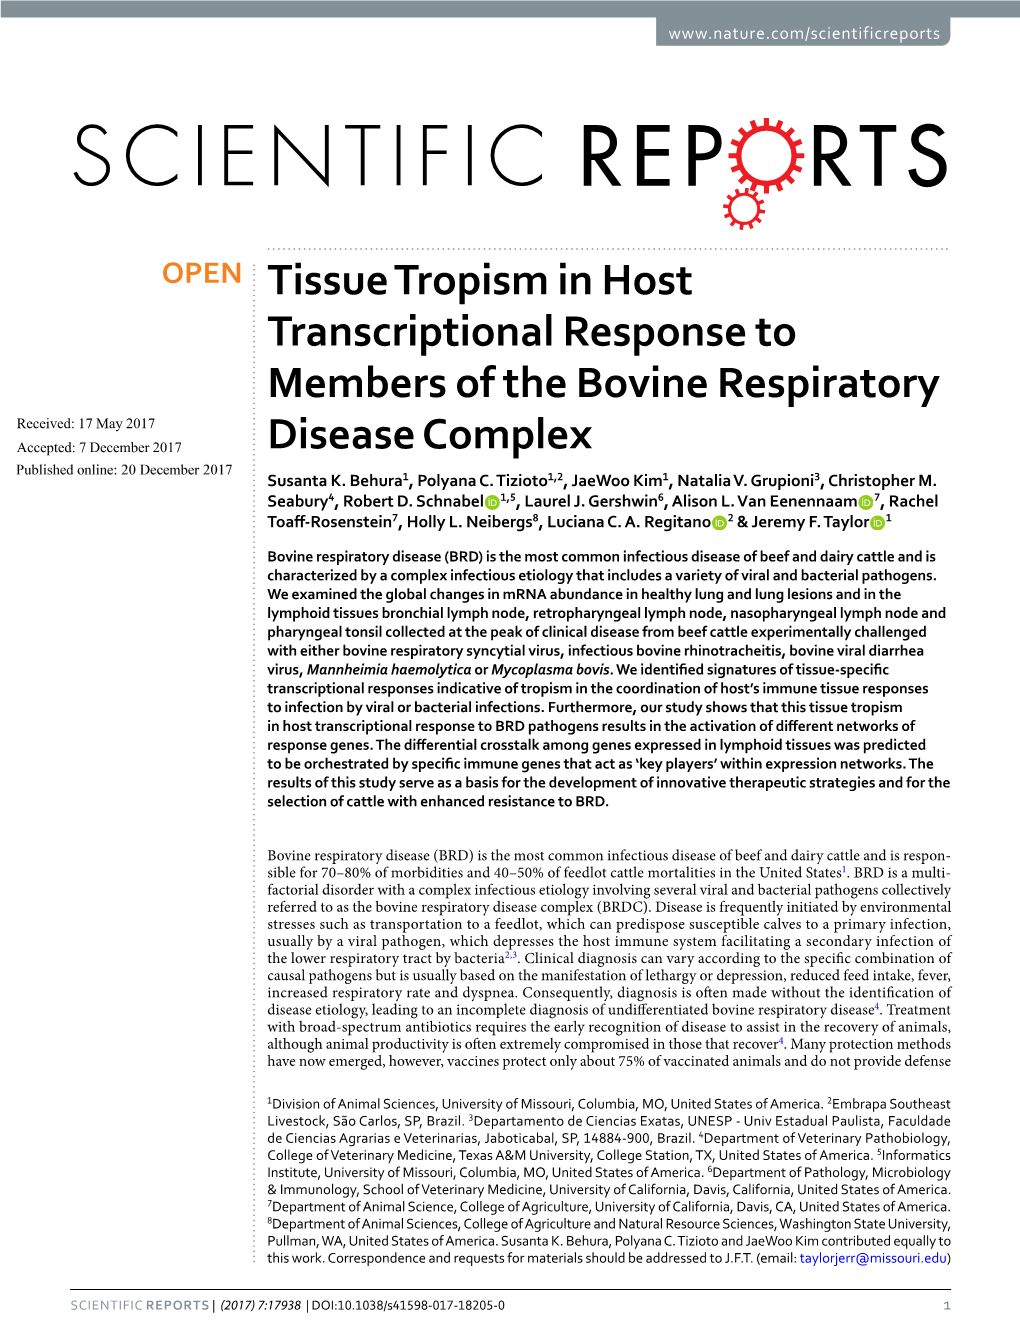 Tissue Tropism in Host Transcriptional Response to Members of The